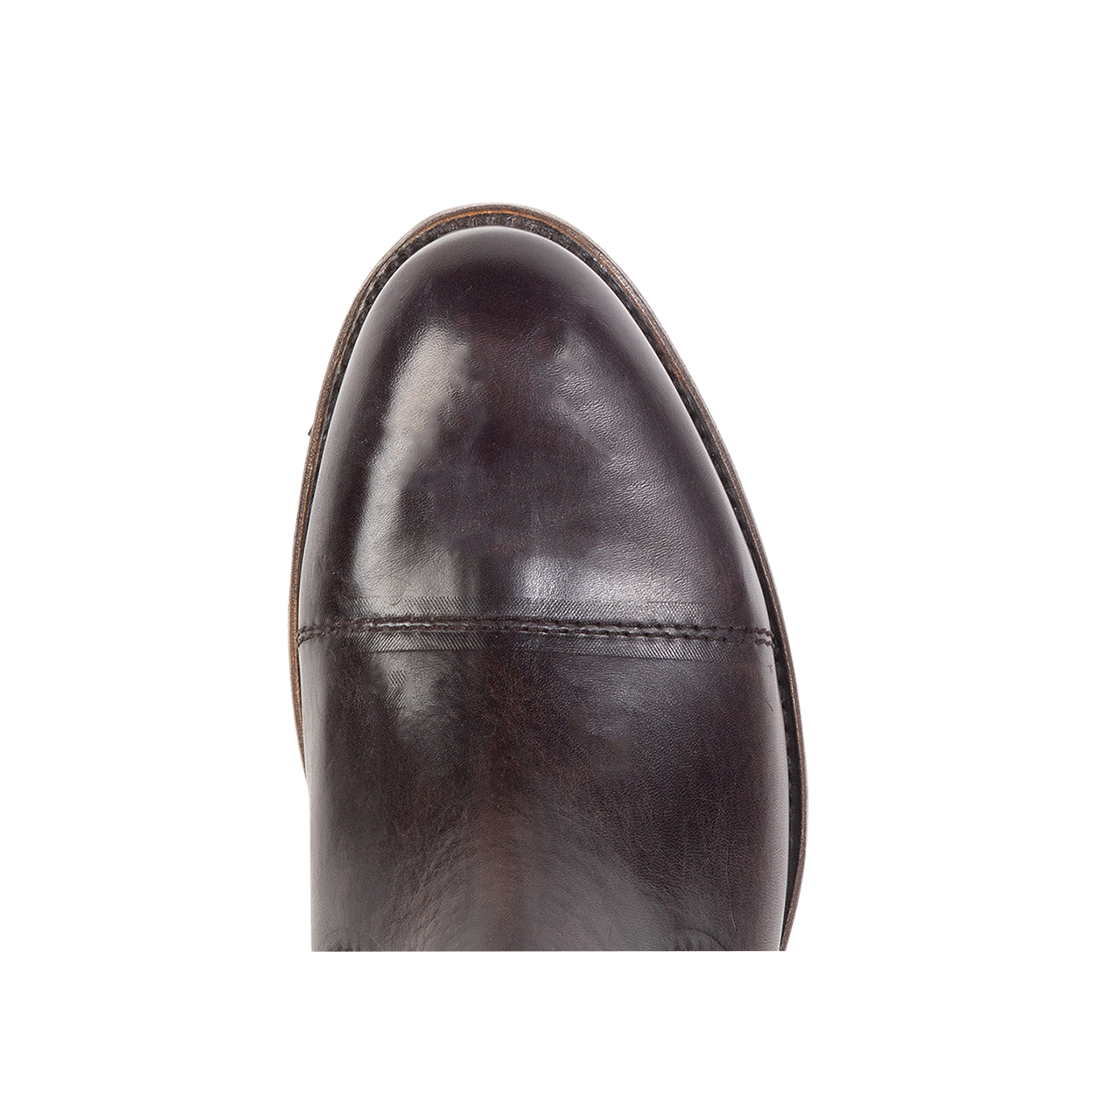 Top view showing almond toe and stitch detailing on FREEBIRD men's Curtis black leather chelsea boot